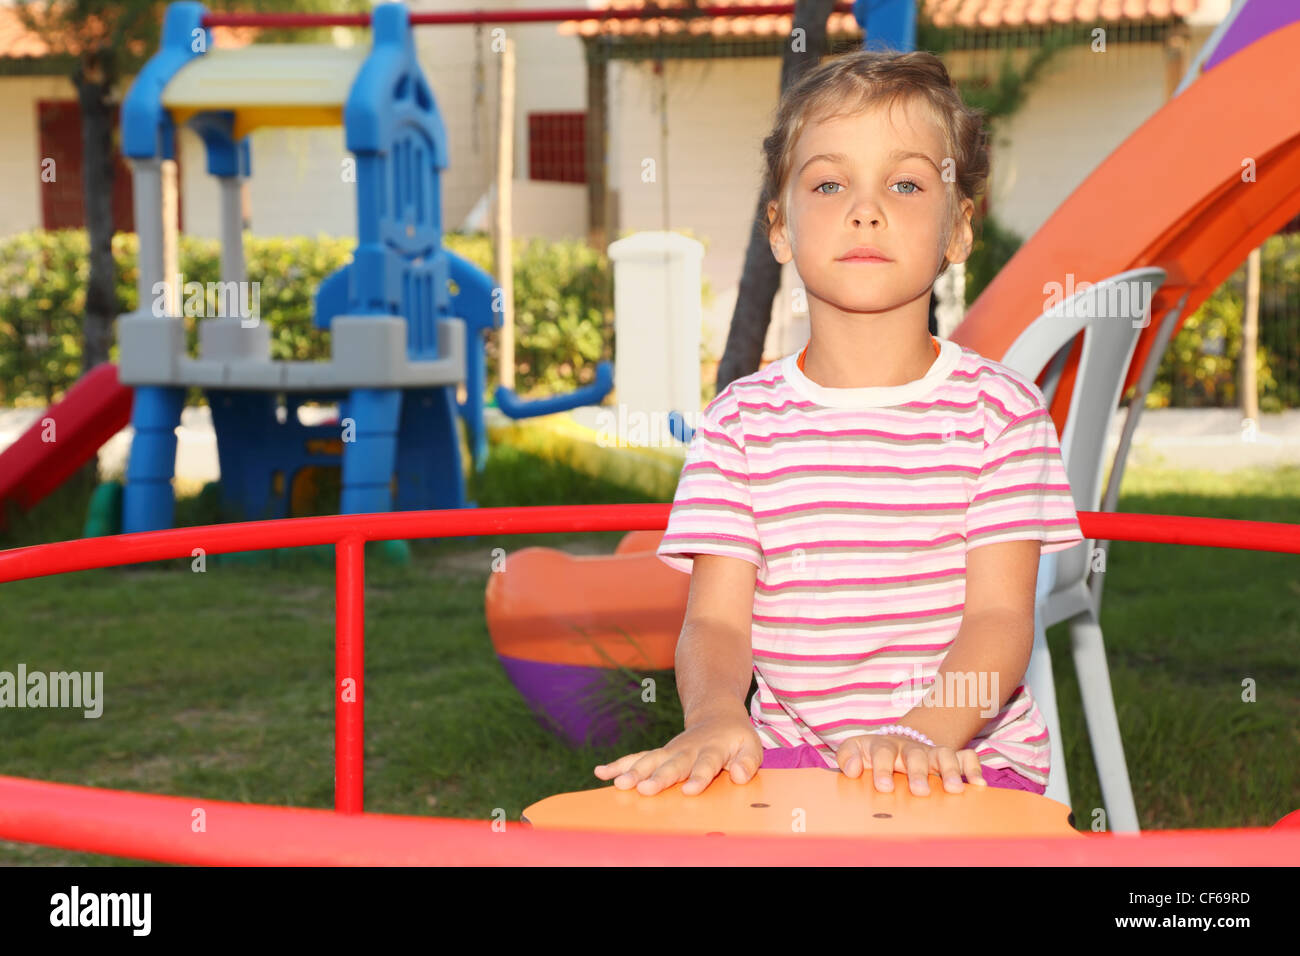 serious little girl in pink shirt sitting on merry-go-round on playground and looking at camera, building Stock Photo